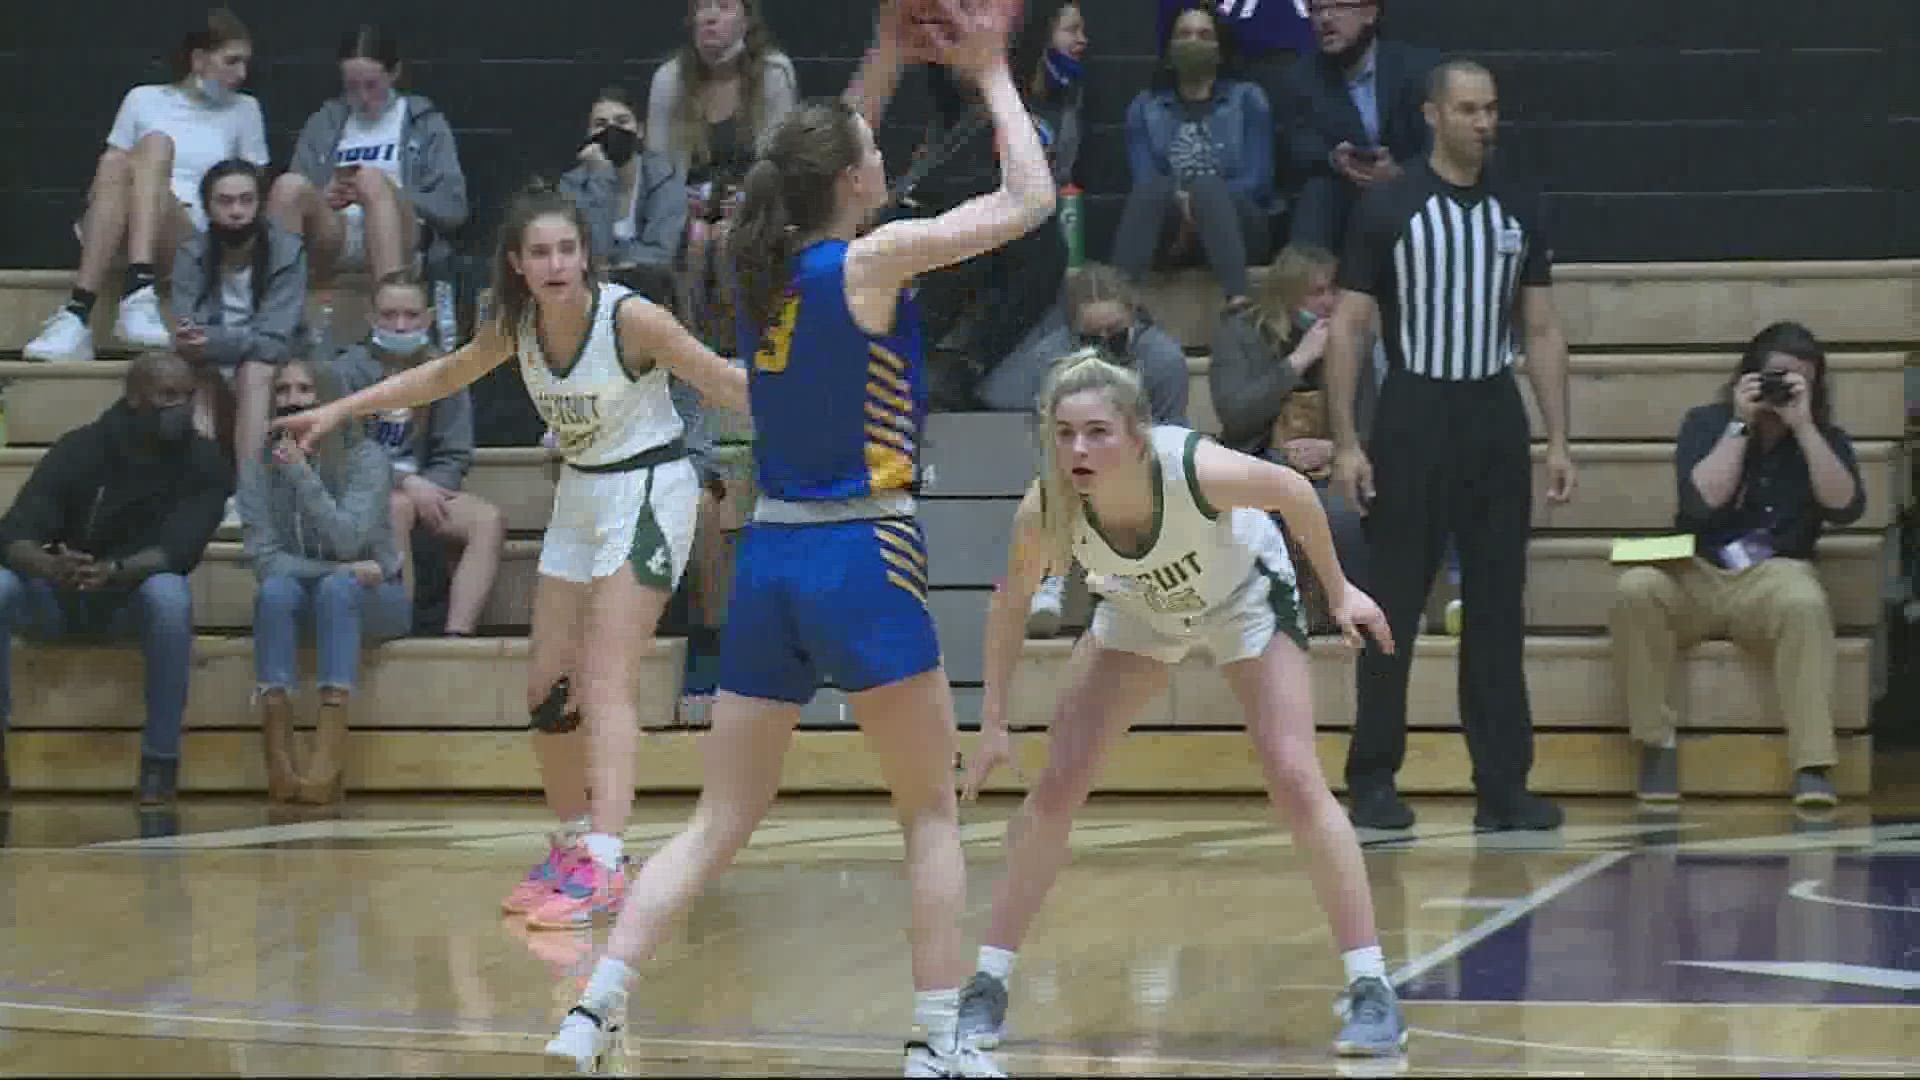 24 Oregon high schools competed in quarterfinal games Thursday in the 4A, 5A and 6A girls basketball playoffs.